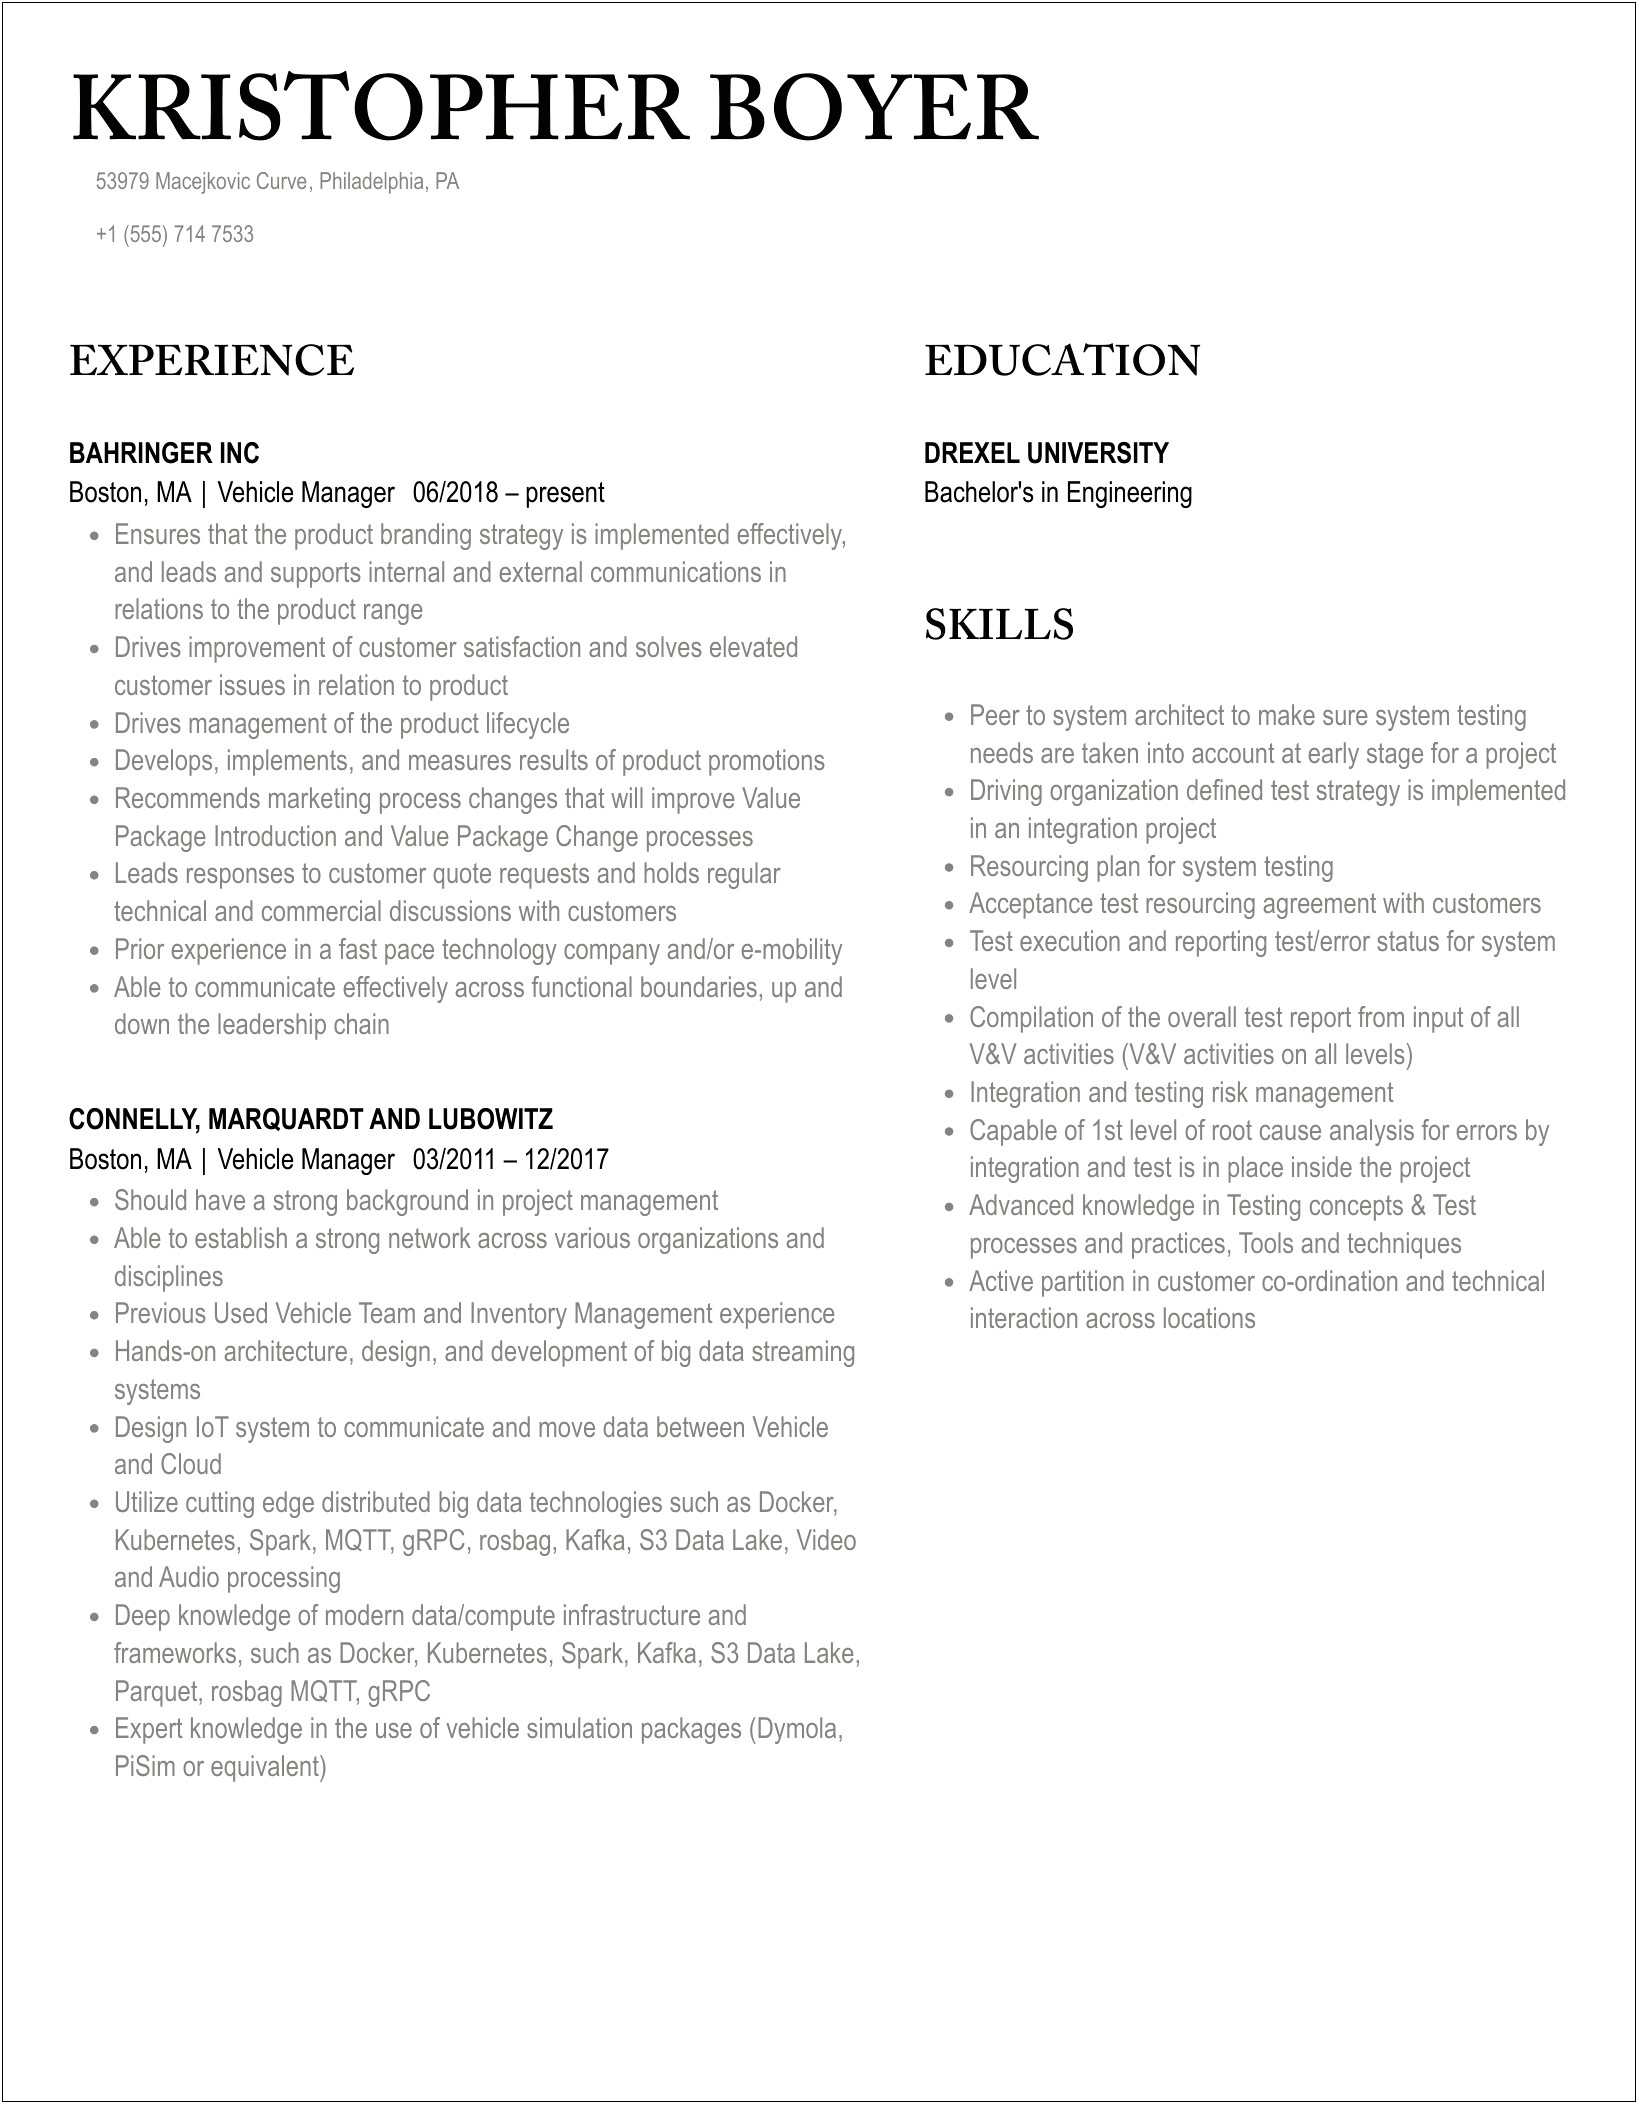 Resume For A Manager In The Tow Industry